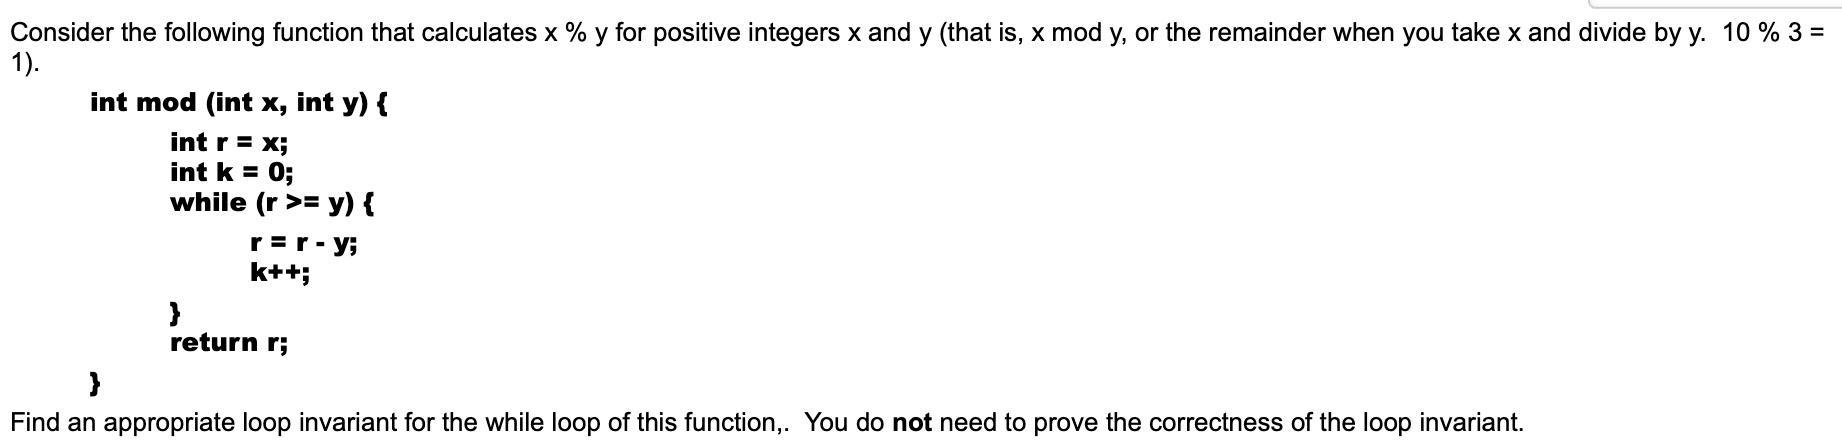 Consider the following function that calculates x % y for positive integers x and y (that is, x mod y, or the